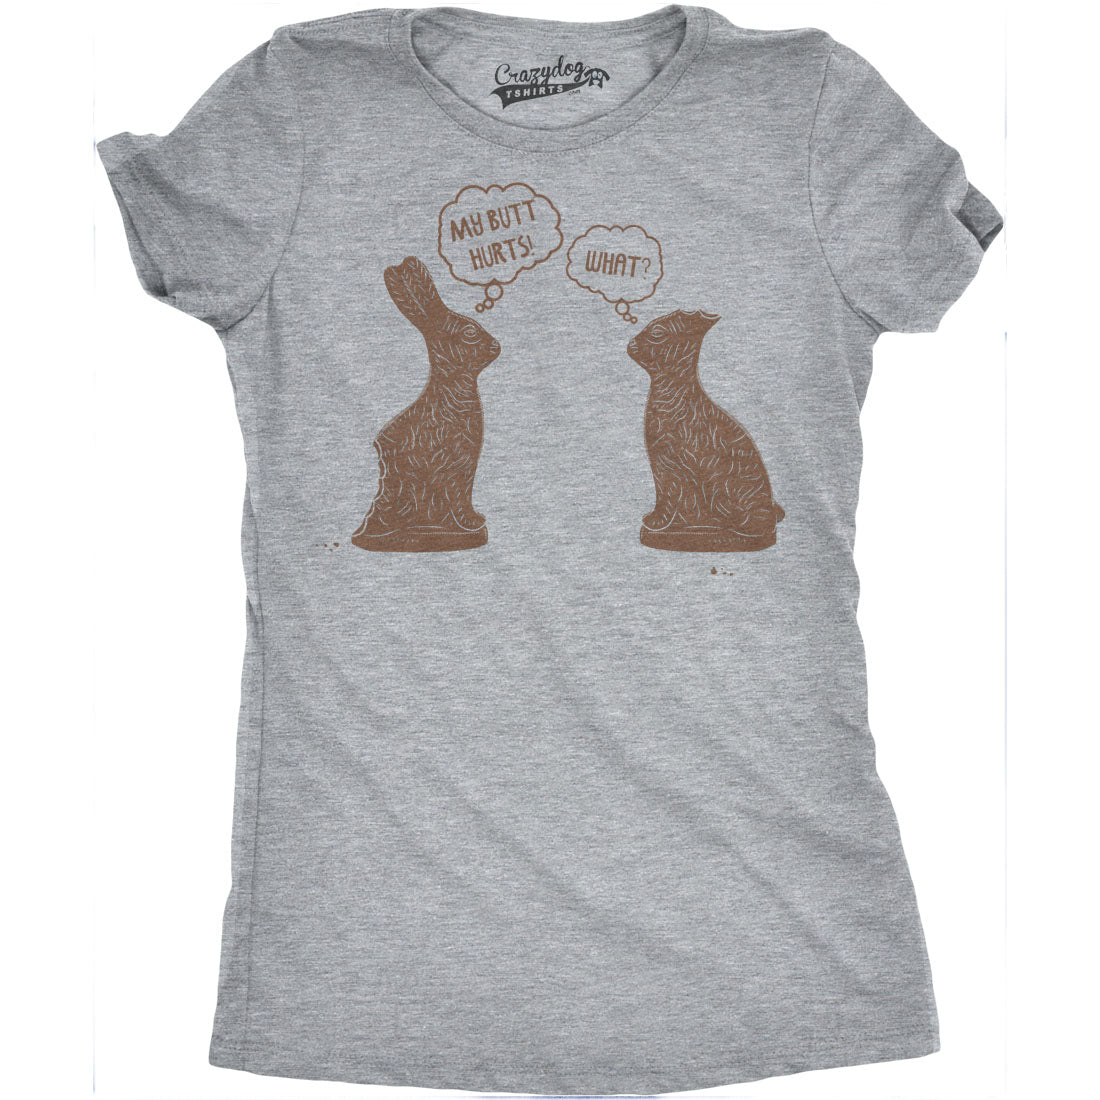 Funny Light Heather Grey My Butt Hurts Womens T Shirt Nerdy Easter Sarcastic Tee